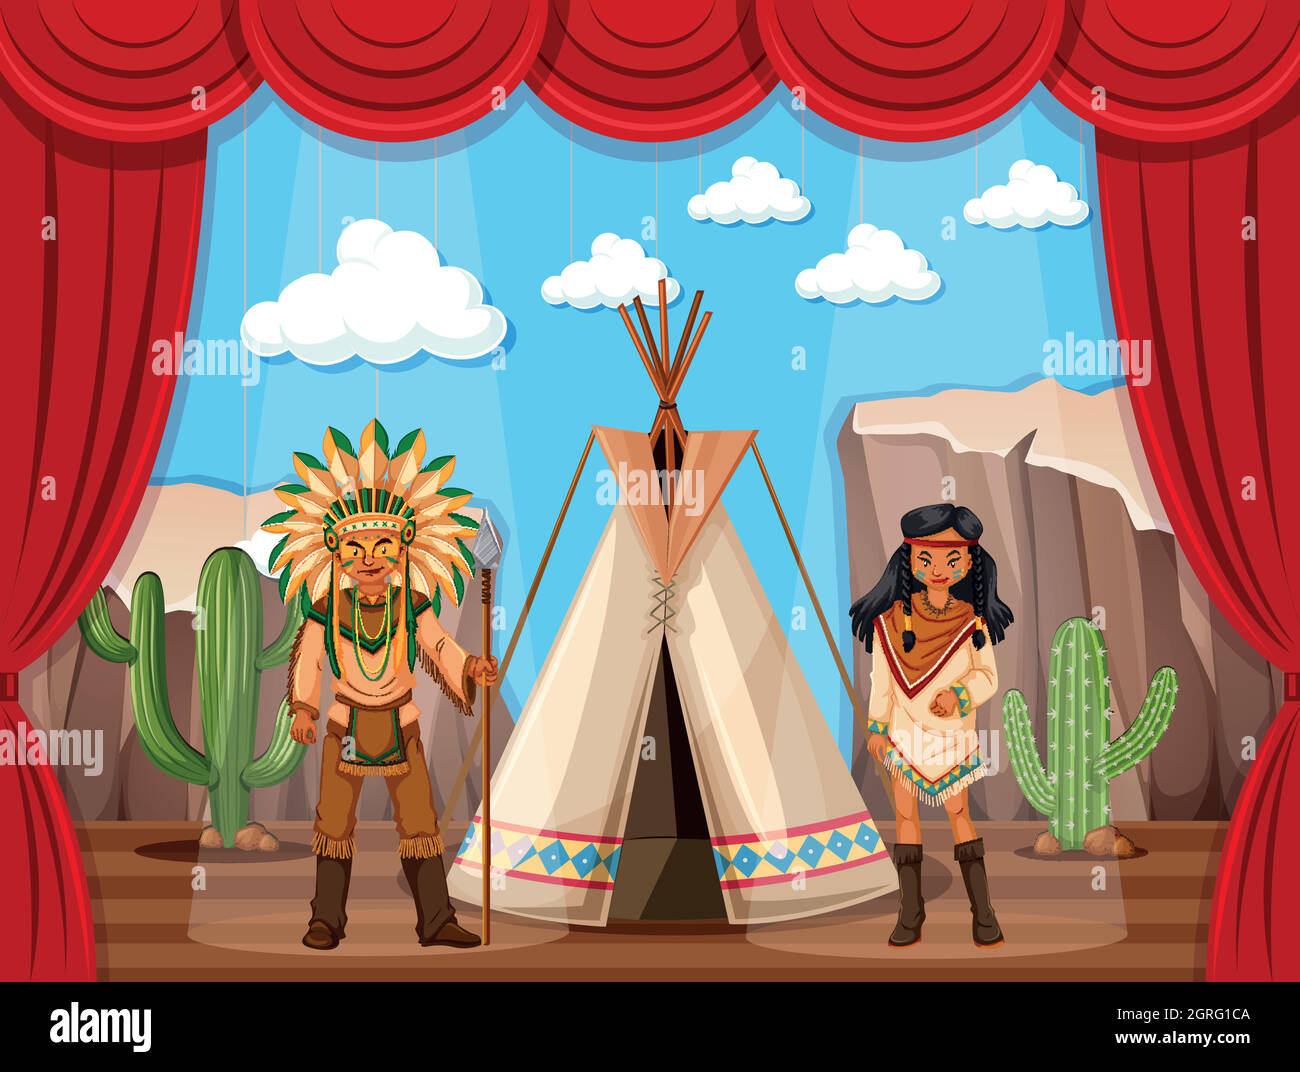 American Indian and teepee on stage Stock Vector